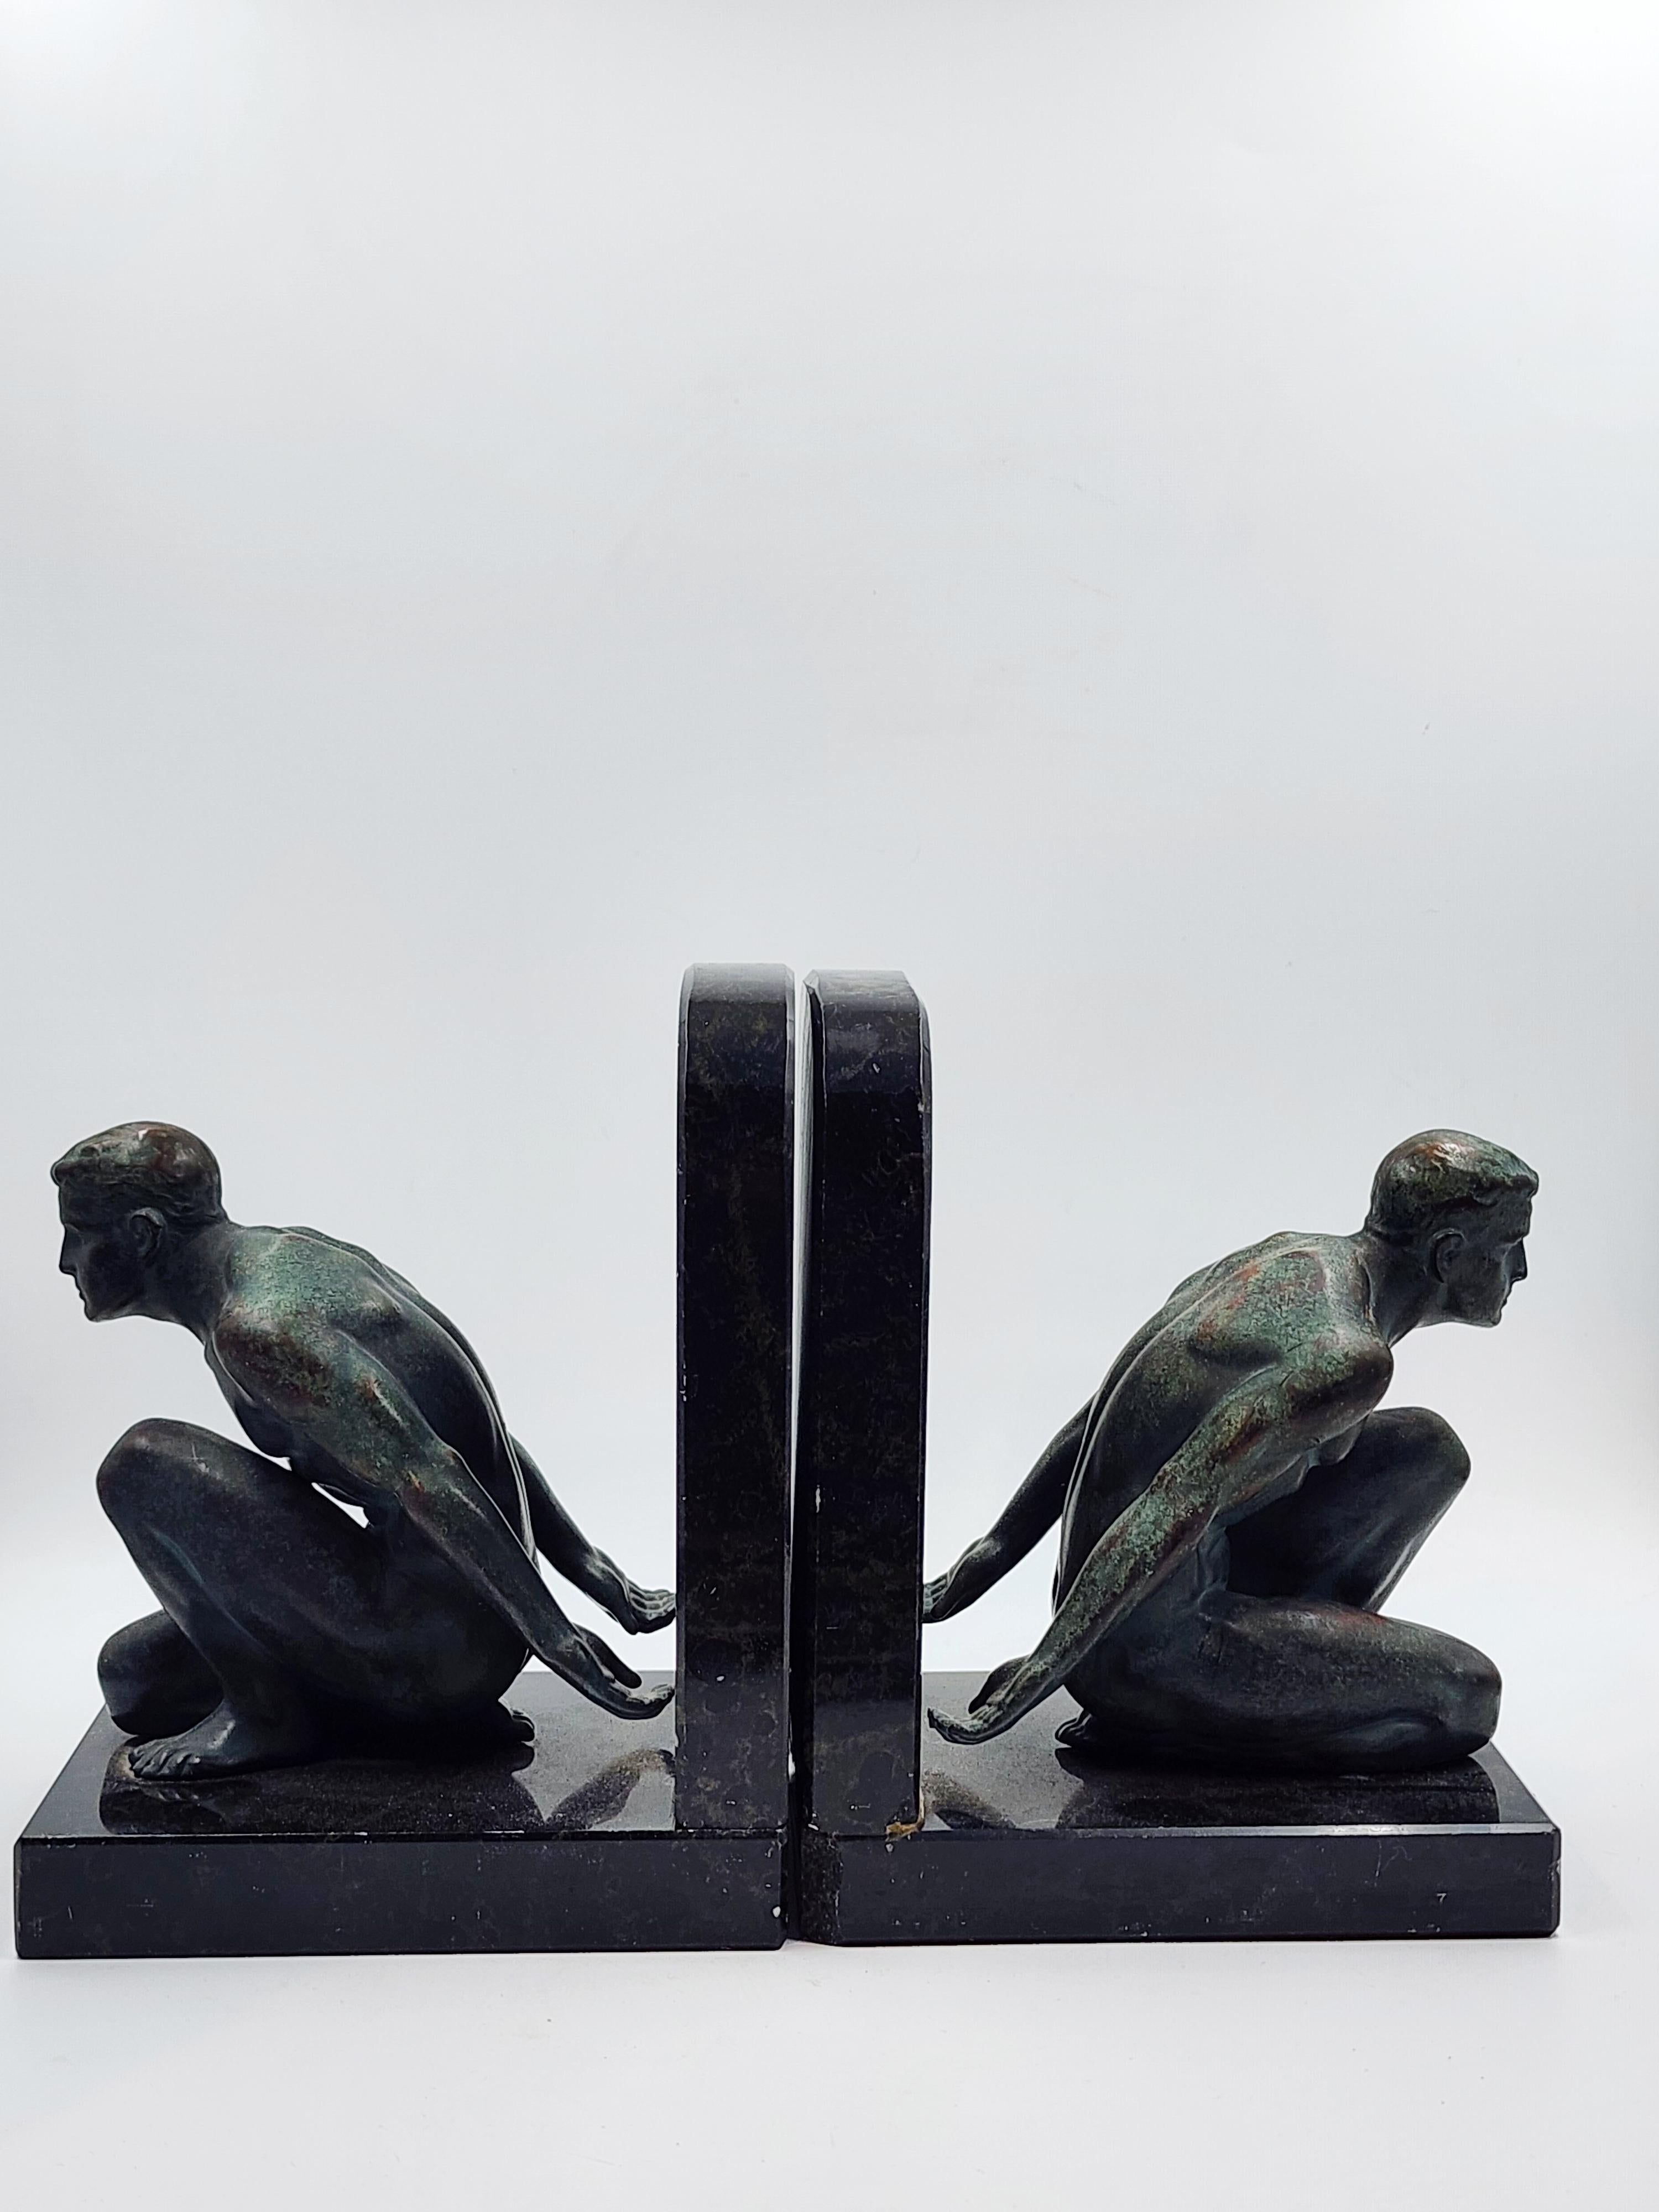 Art Deco marble and bronze bookends
Beautiful bookends in black marble with bronze patinated in Pompeian green, with representation of men in a carrying position showing how they carry the books.
Measures:
Height: 16 centimeters
Length: 12